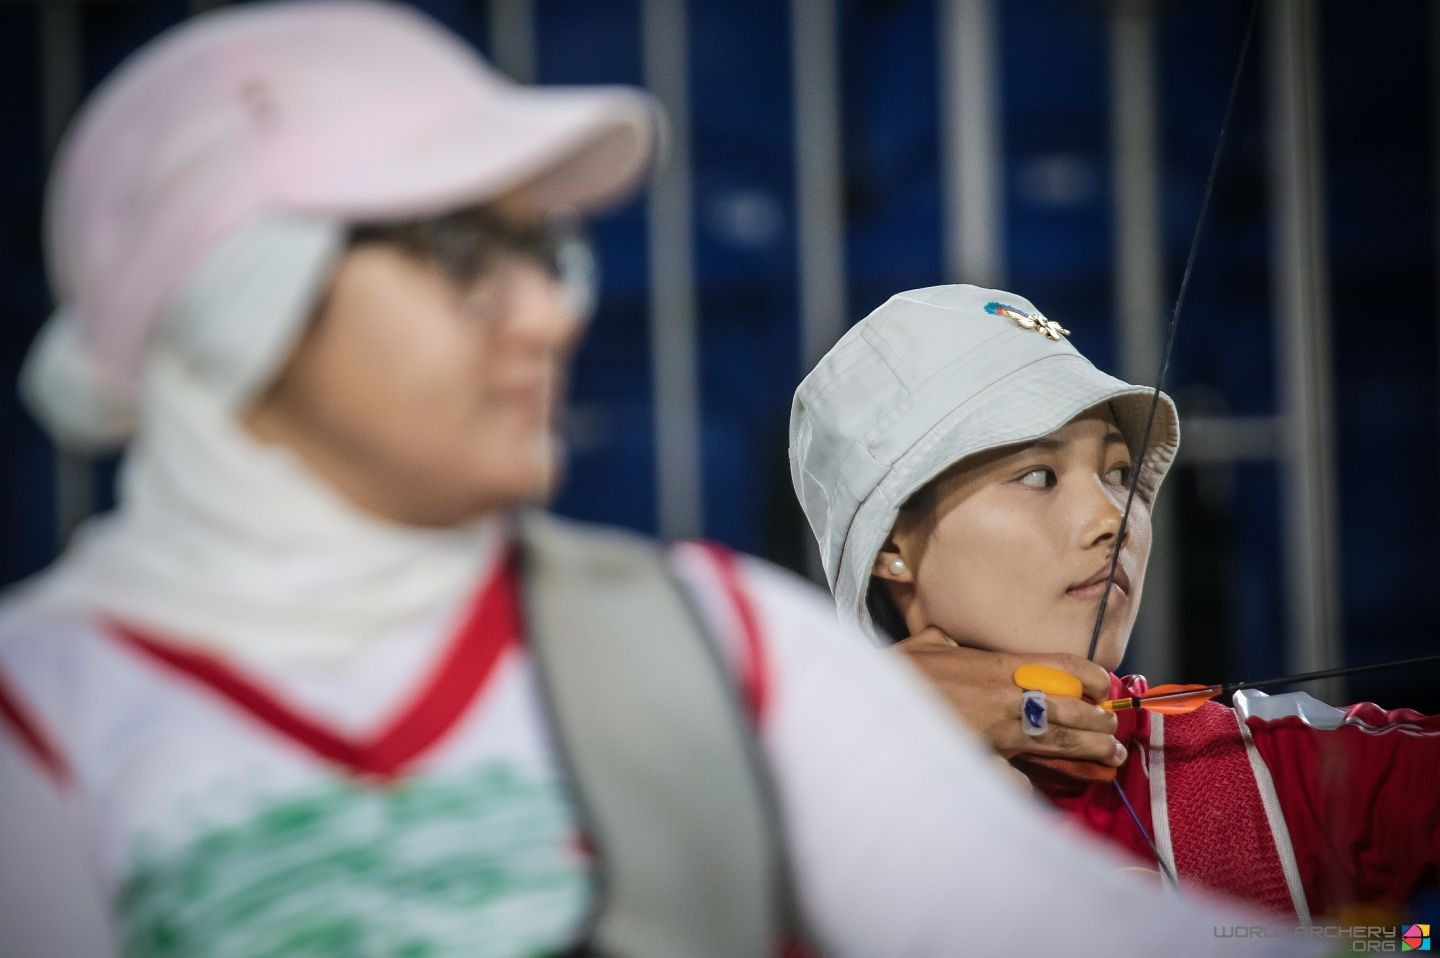 Nemati gets ahead in World Archery Para Championships battle with Wu 